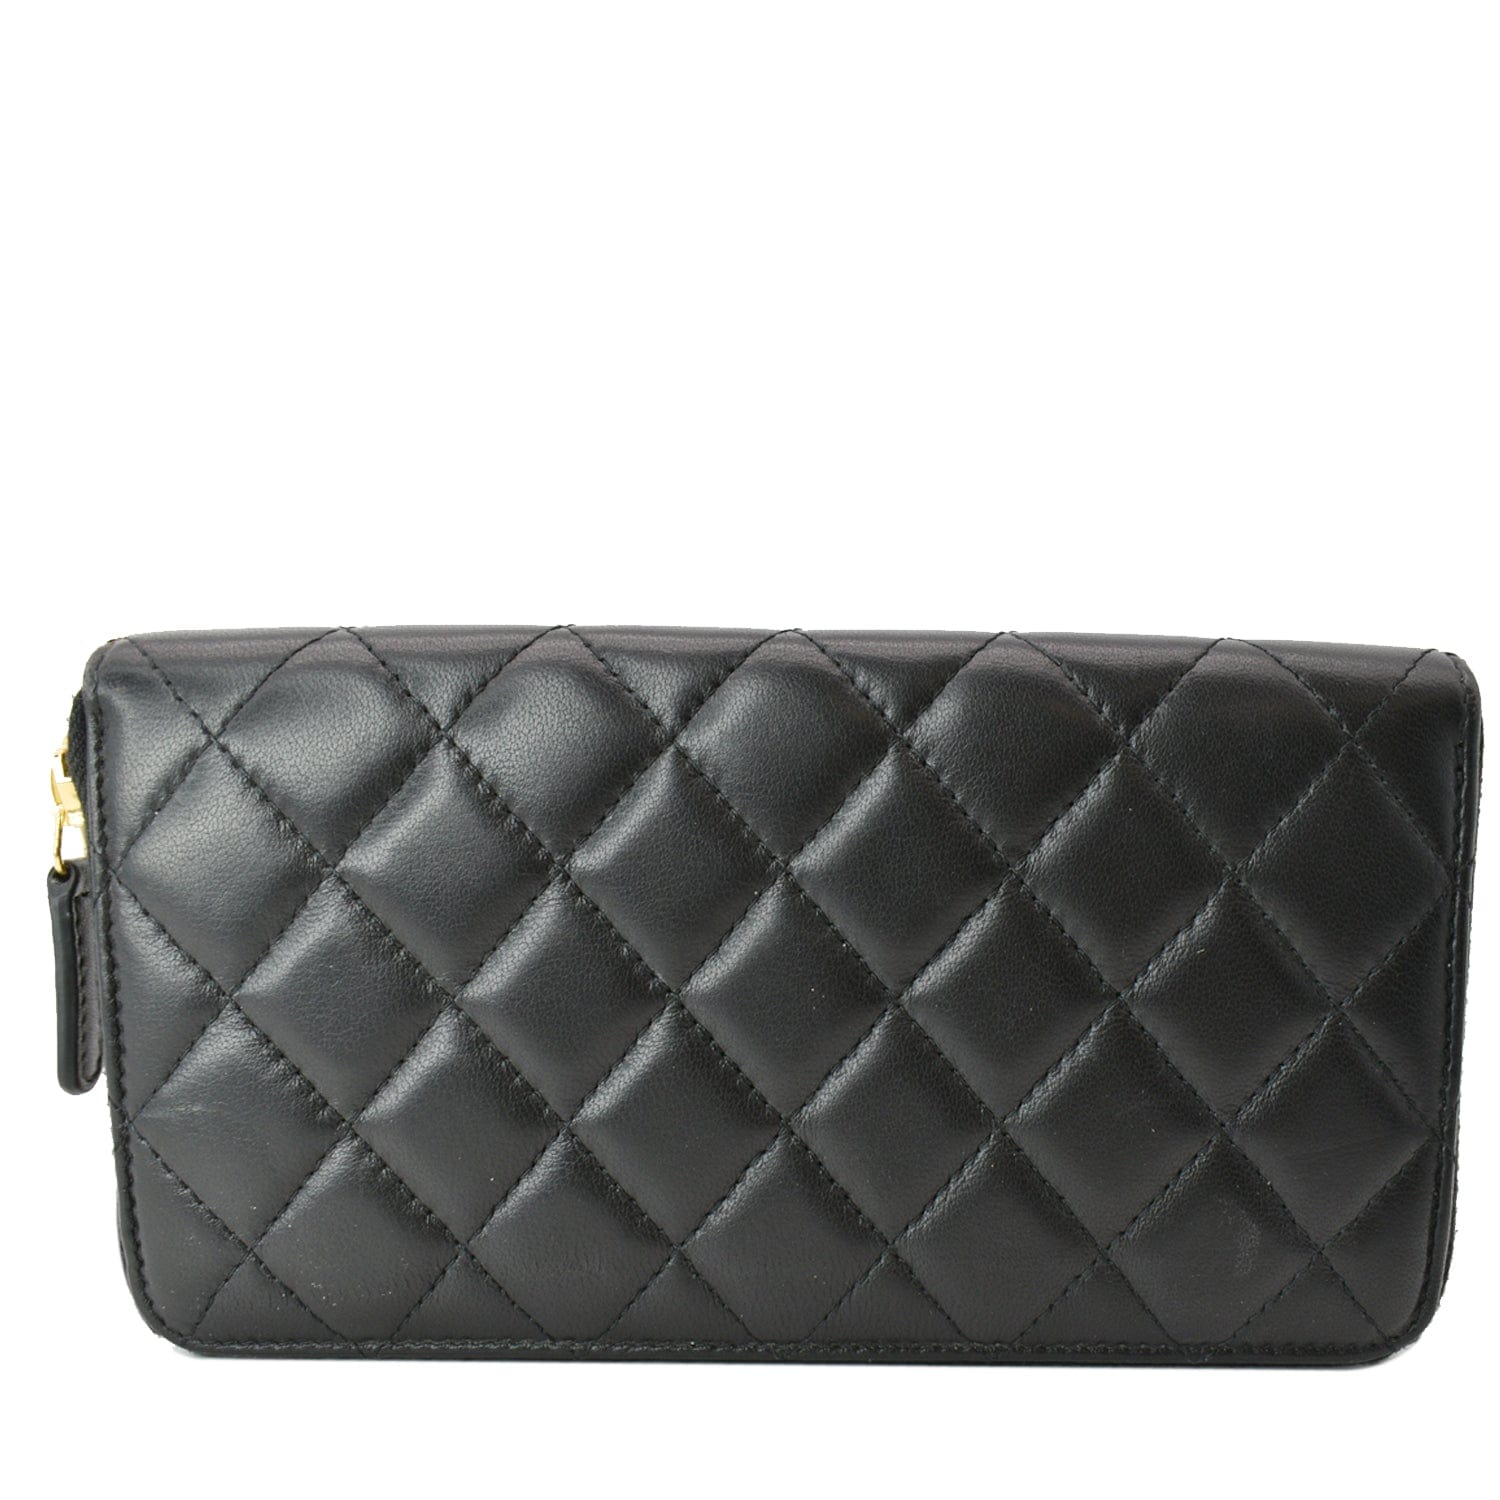 MODA ARCHIVE X REBAG Pre-Owned Chanel Quilted Leather Wallet on